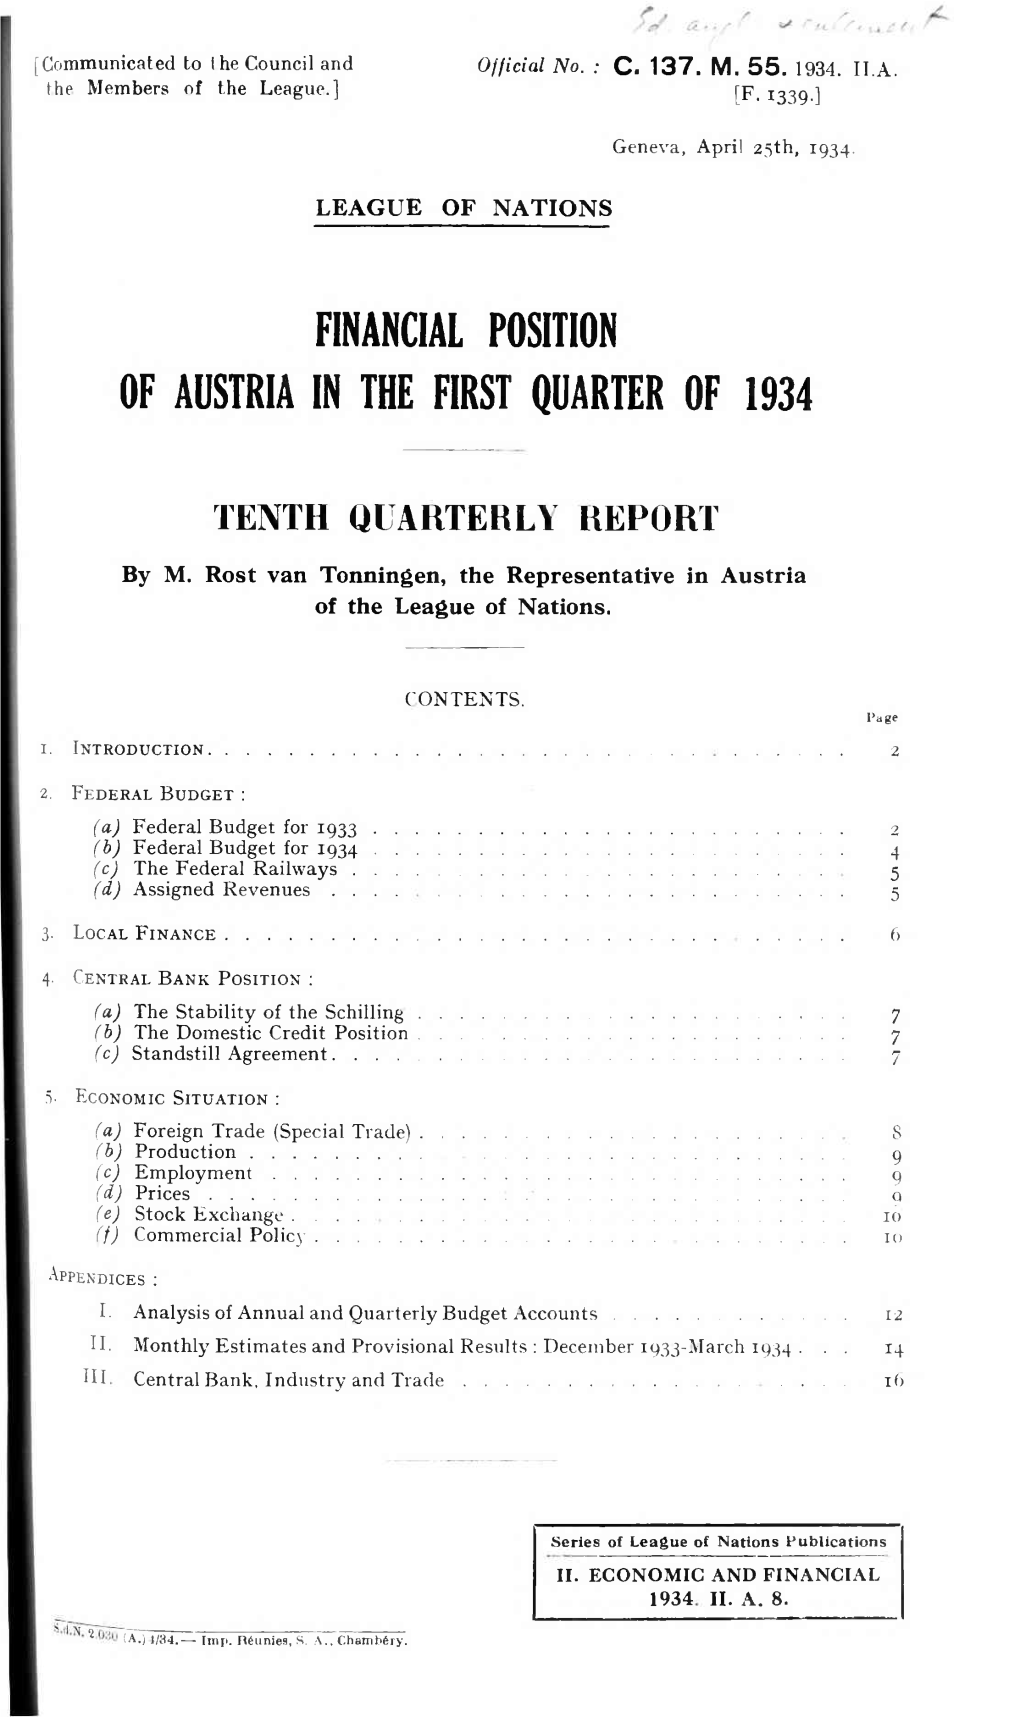 Financial Position of Austria in the First Quarter of 1934